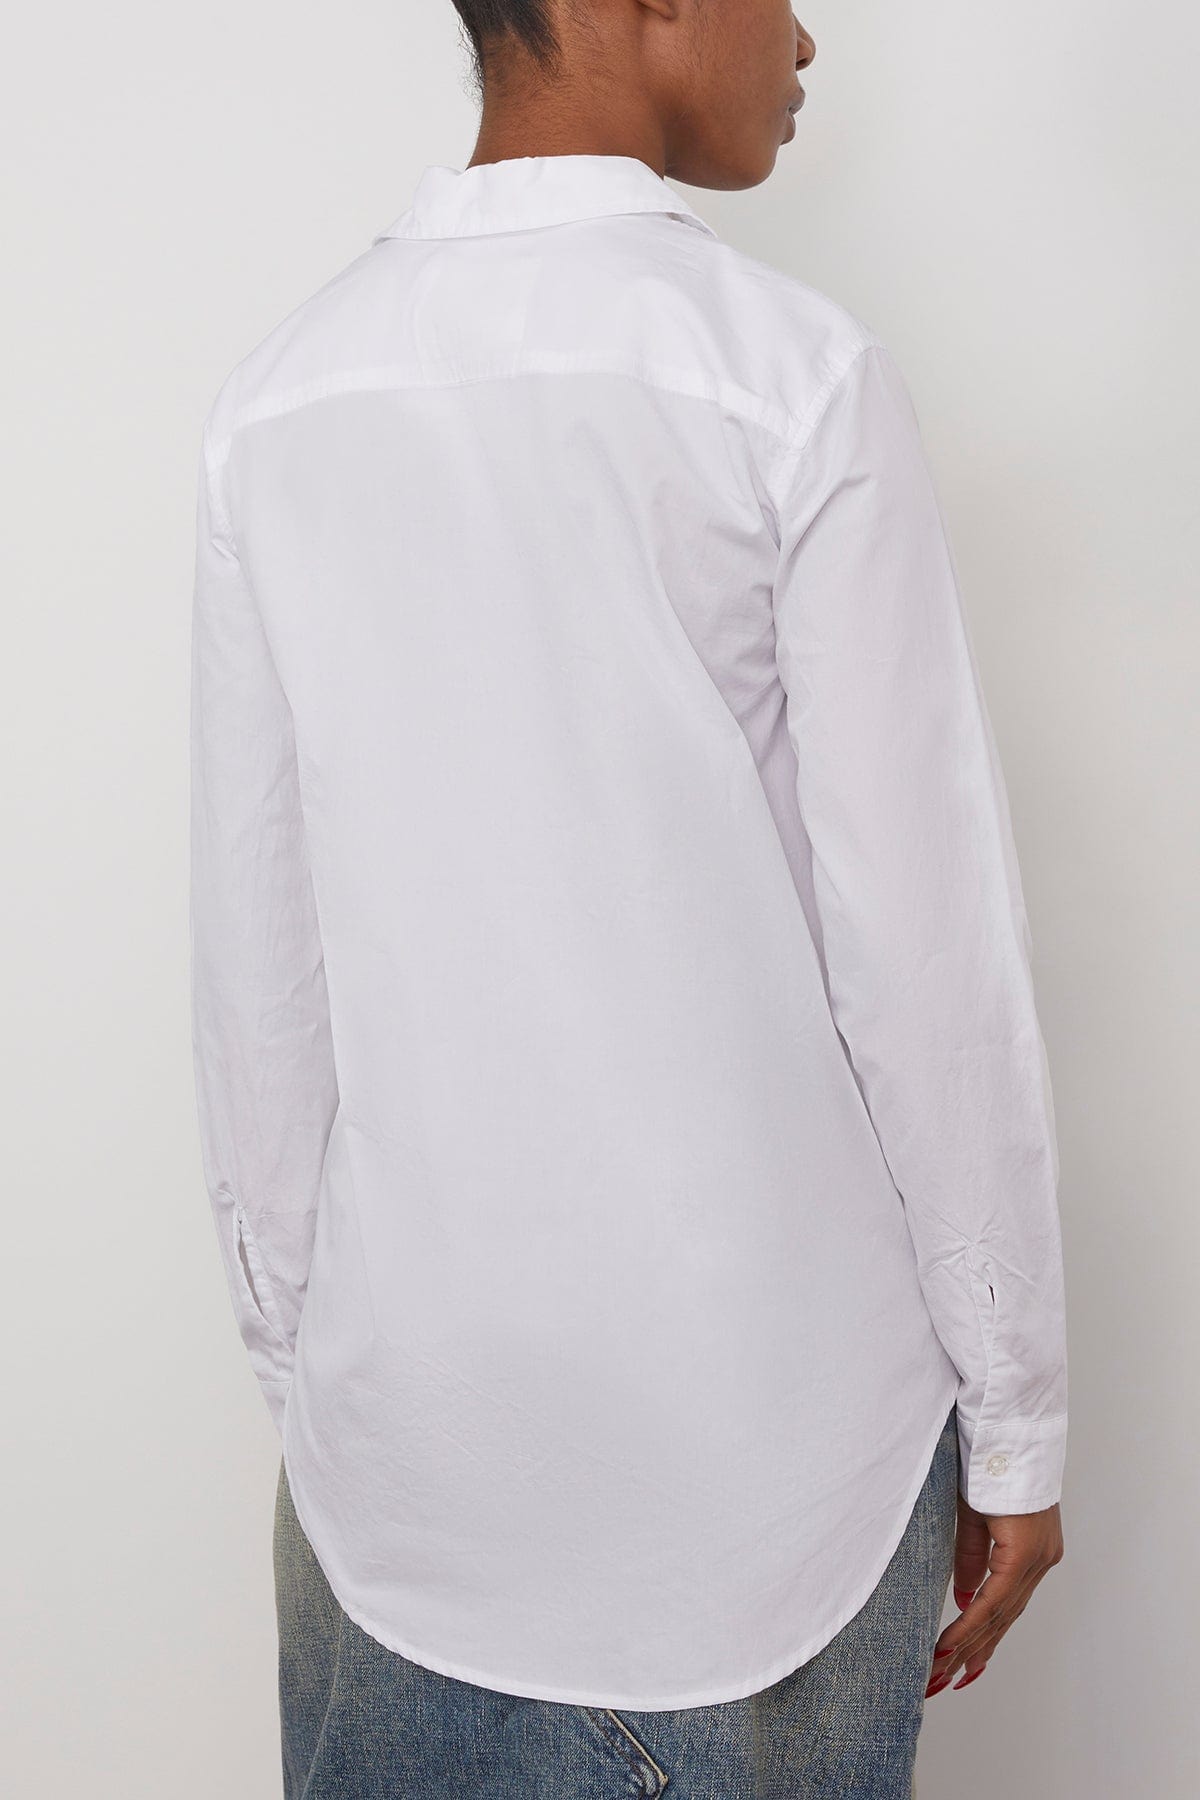 R13 Tops Foldout Shirt in White